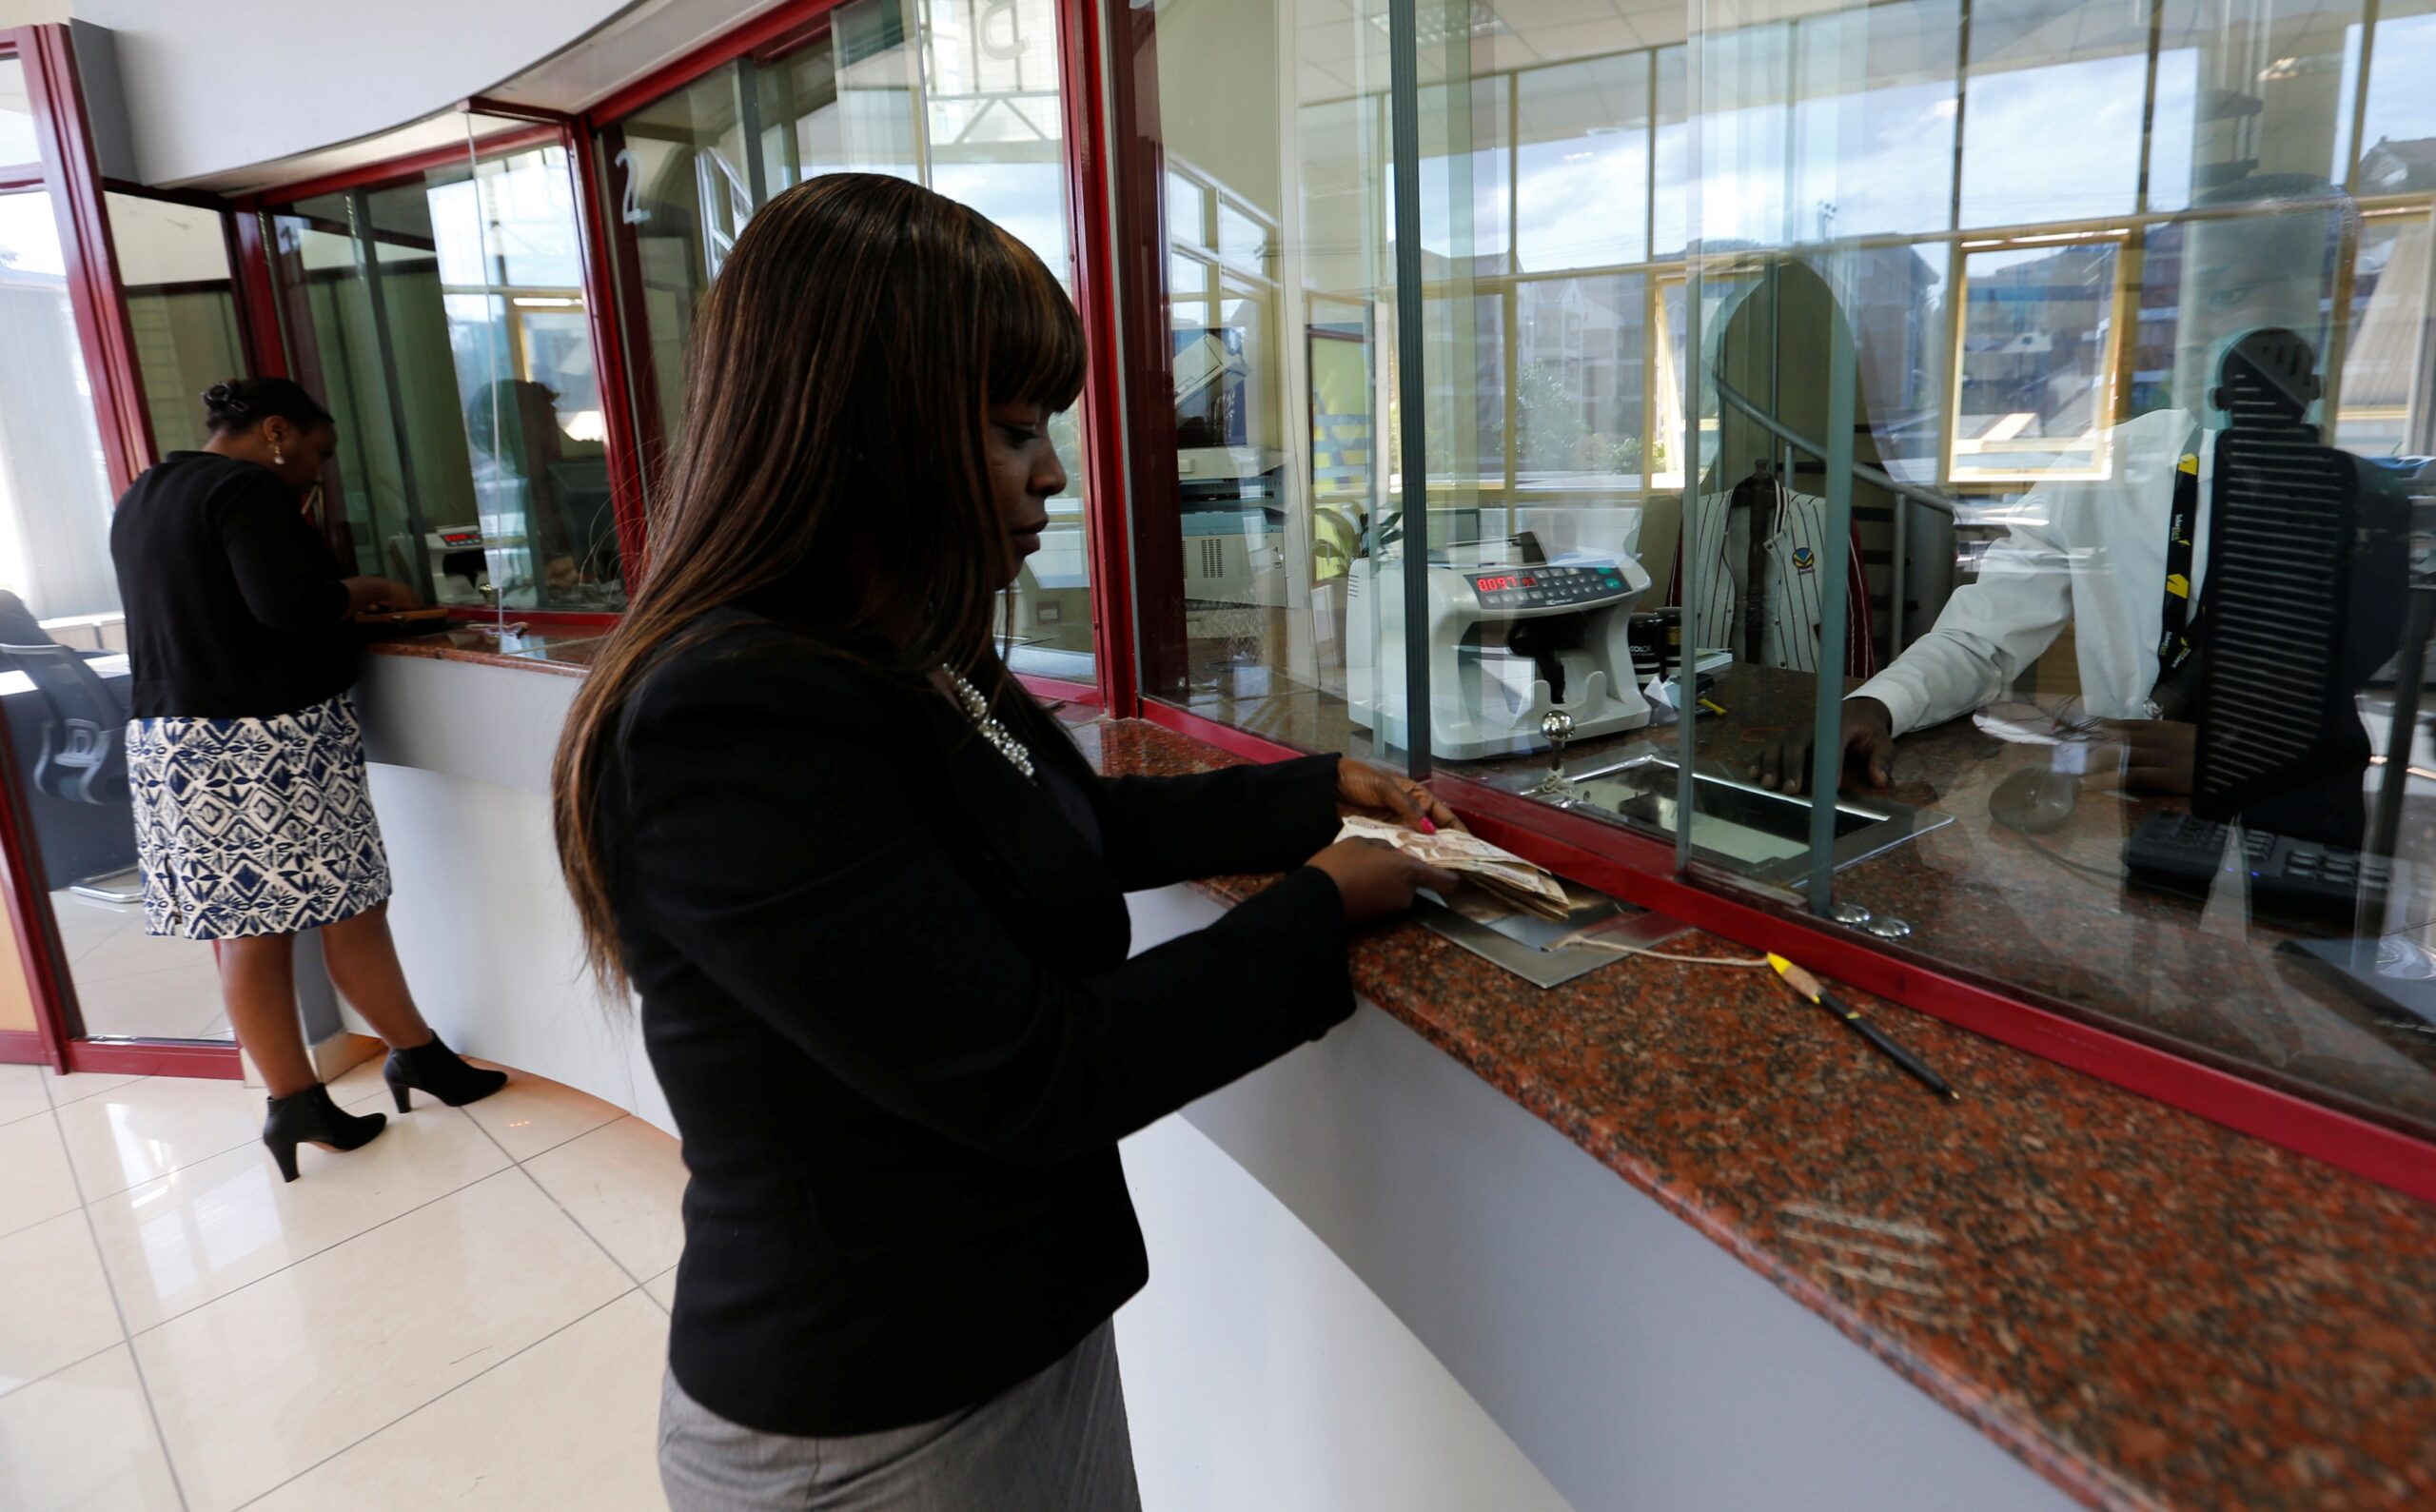 A customer is served at the teller counter inside a banking hall